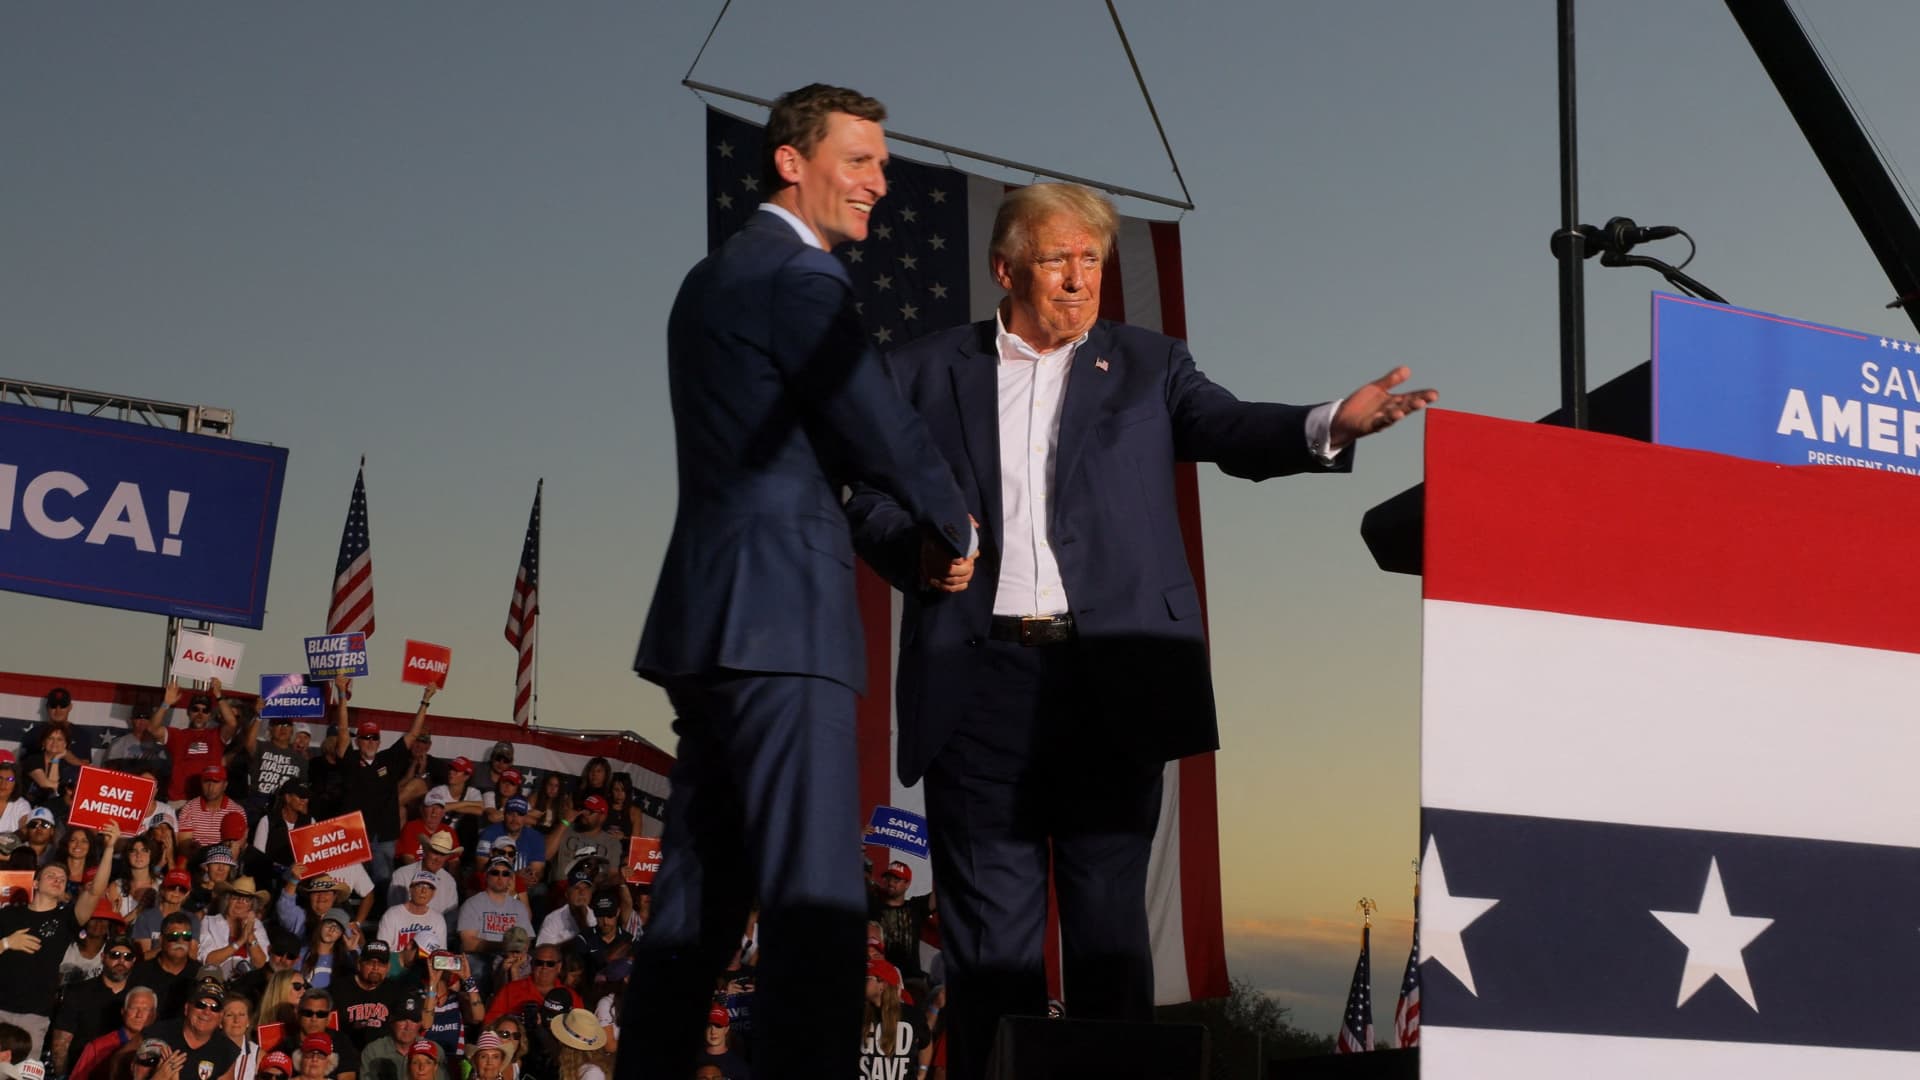 Former U.S. President Donald Trump shakes hands with U.S. Senate candidate Blake Masters (R-AZ) on stage during a rally ahead of the midterm elections, in Mesa, Arizona, October 9, 2022.